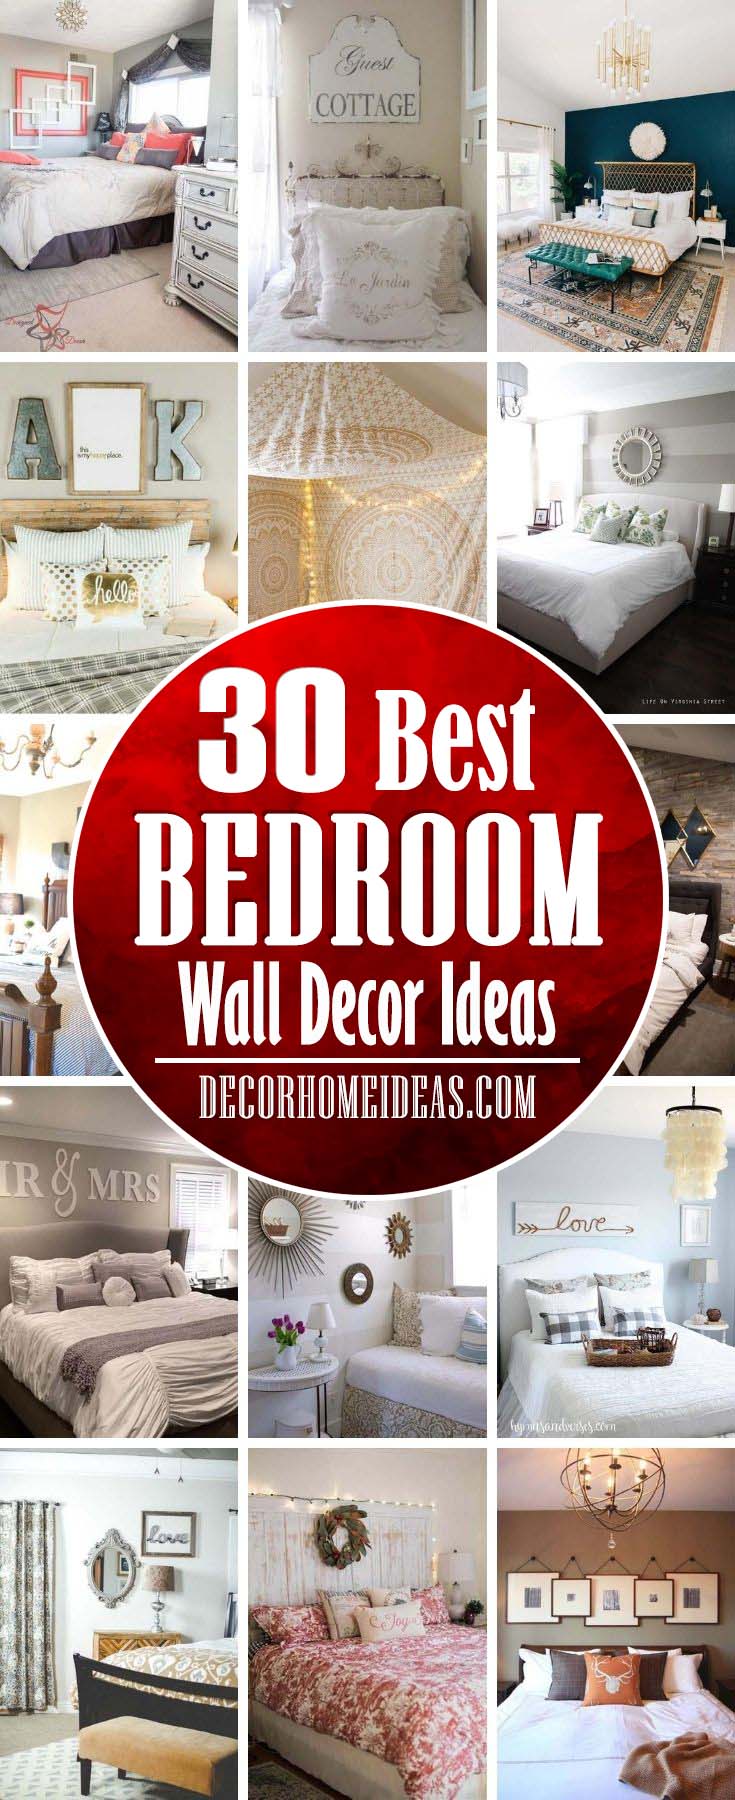 30 Creative Bedroom Wall Decor Ideas To Add Beauty And Charm Home - Home Decor Ideas For Bedroom